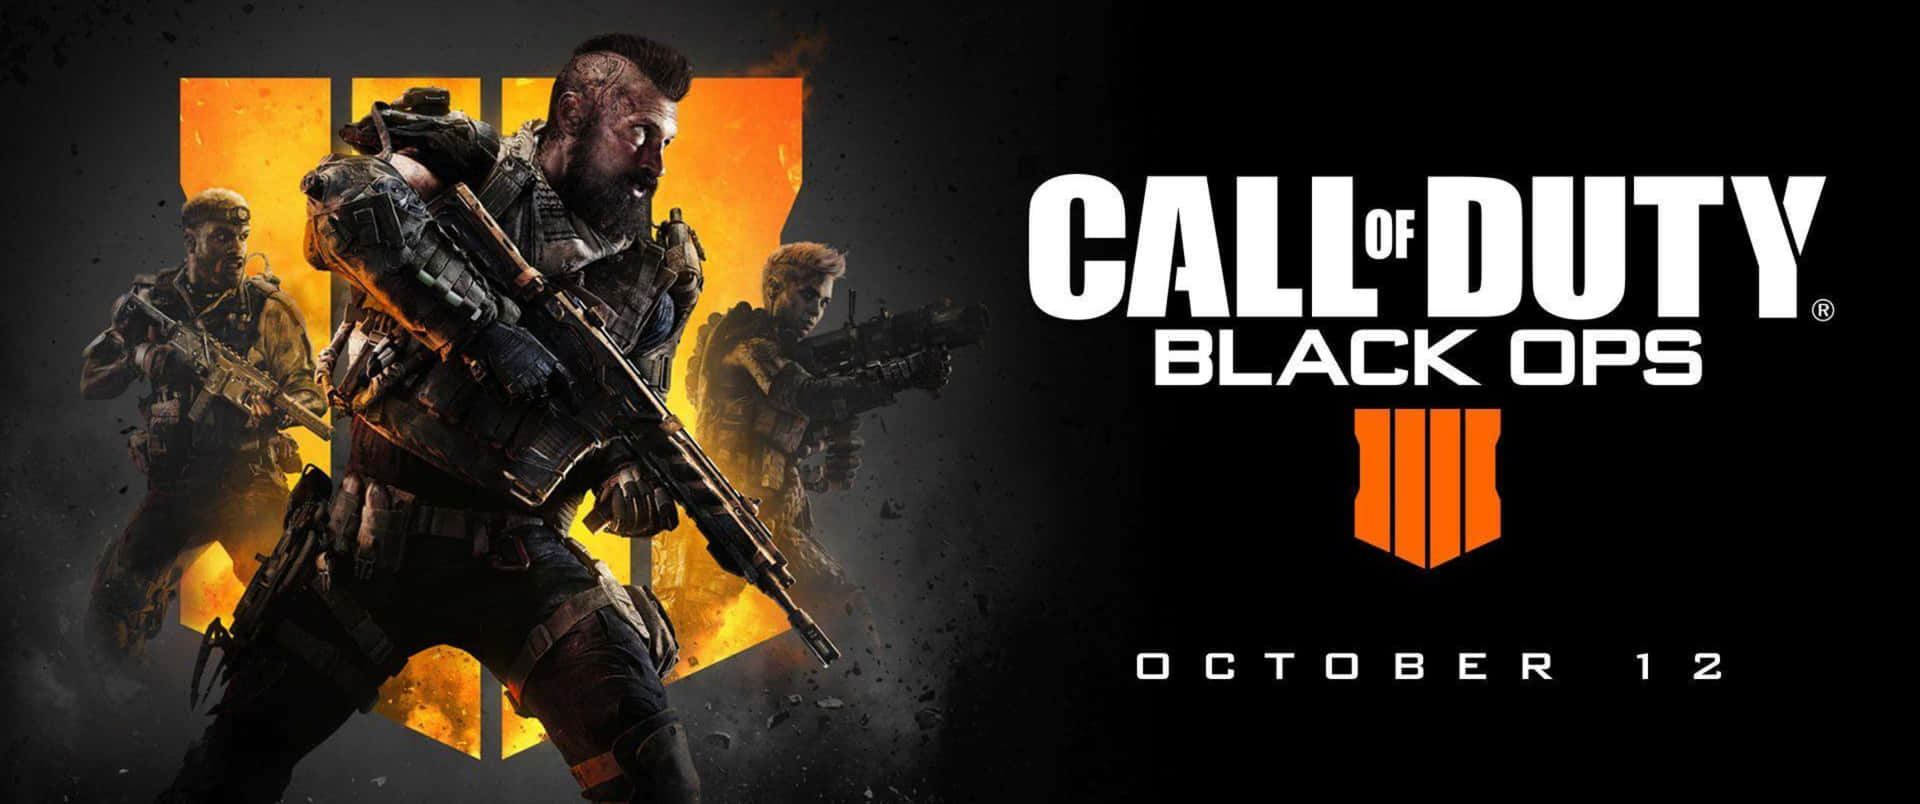 Immerse yourself in the world of Call of Duty:Black Ops 4